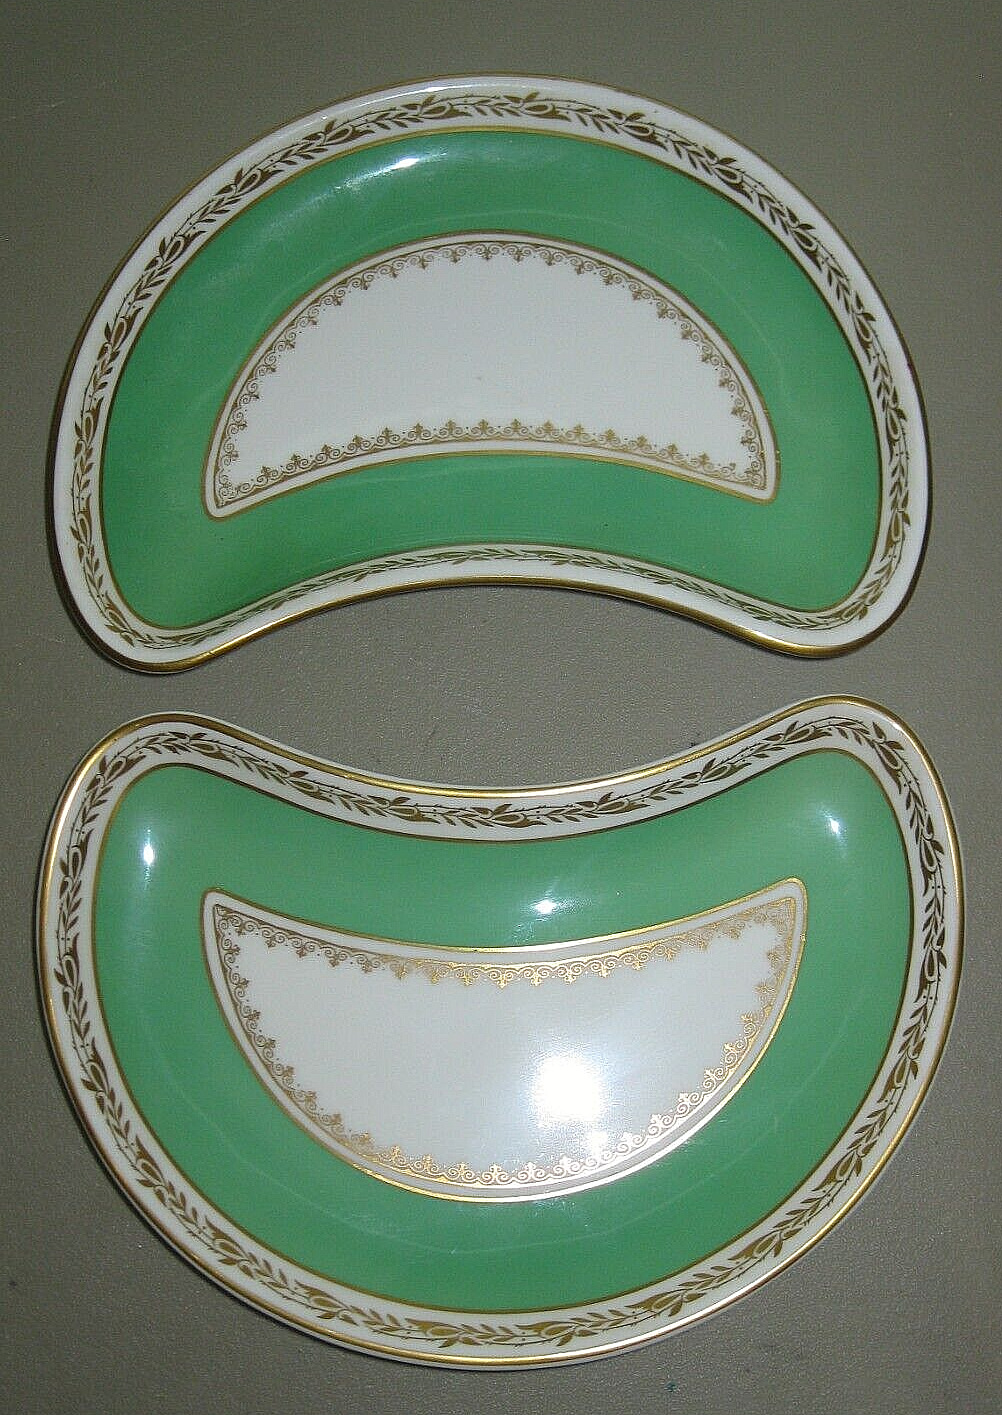 Antique 2 English Mintons China Bone Dishes Green & White With Gold Trim